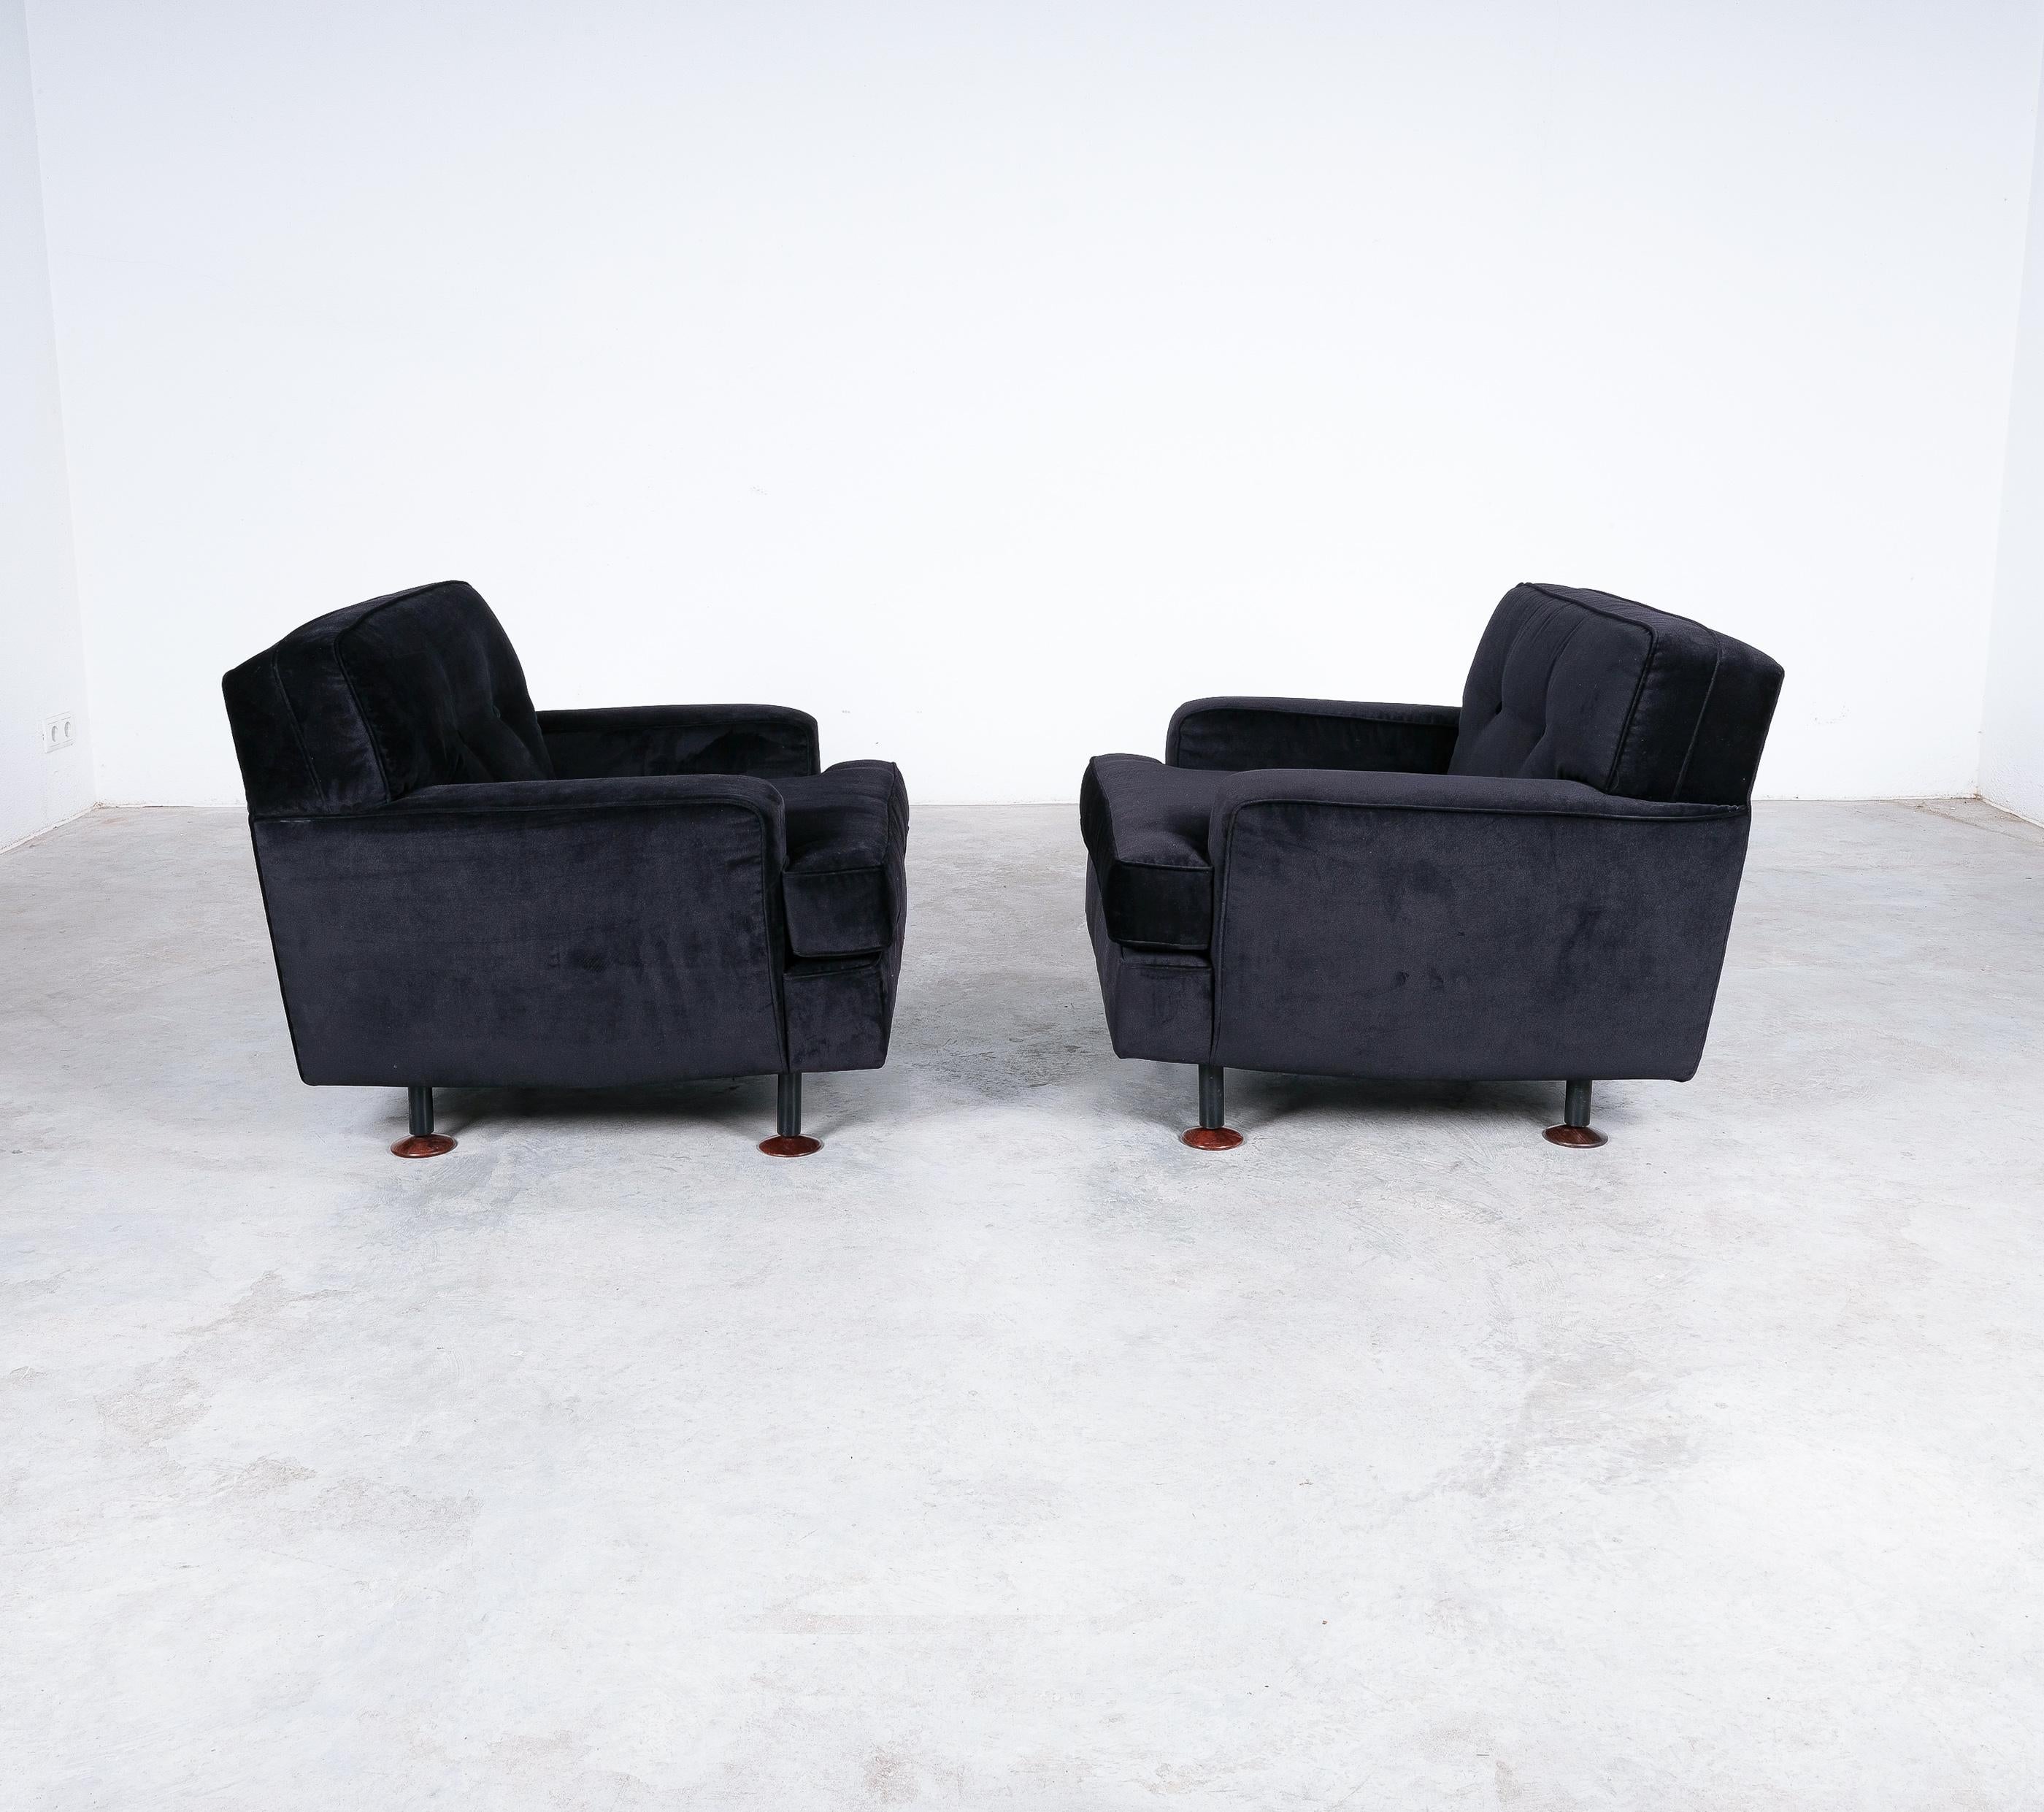 Mid-Century Modern Marco Zanuso 'Square' Black Velvet Chairs with Teak Feet, Italy, circa 1955 For Sale